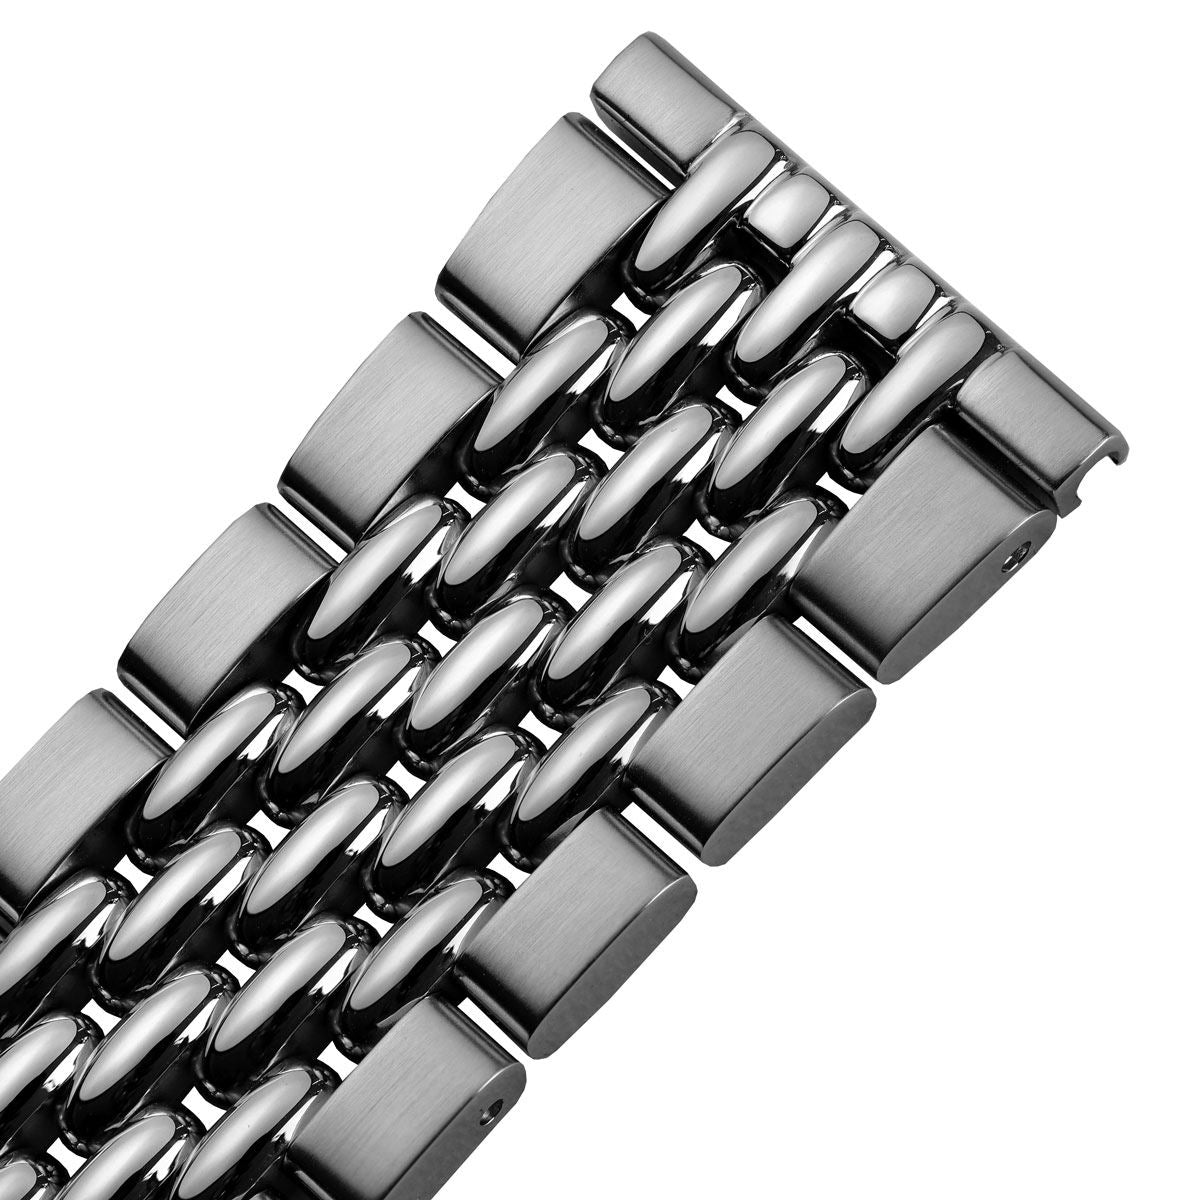 Stainless Steel Beads of Rice Watch Bracelet